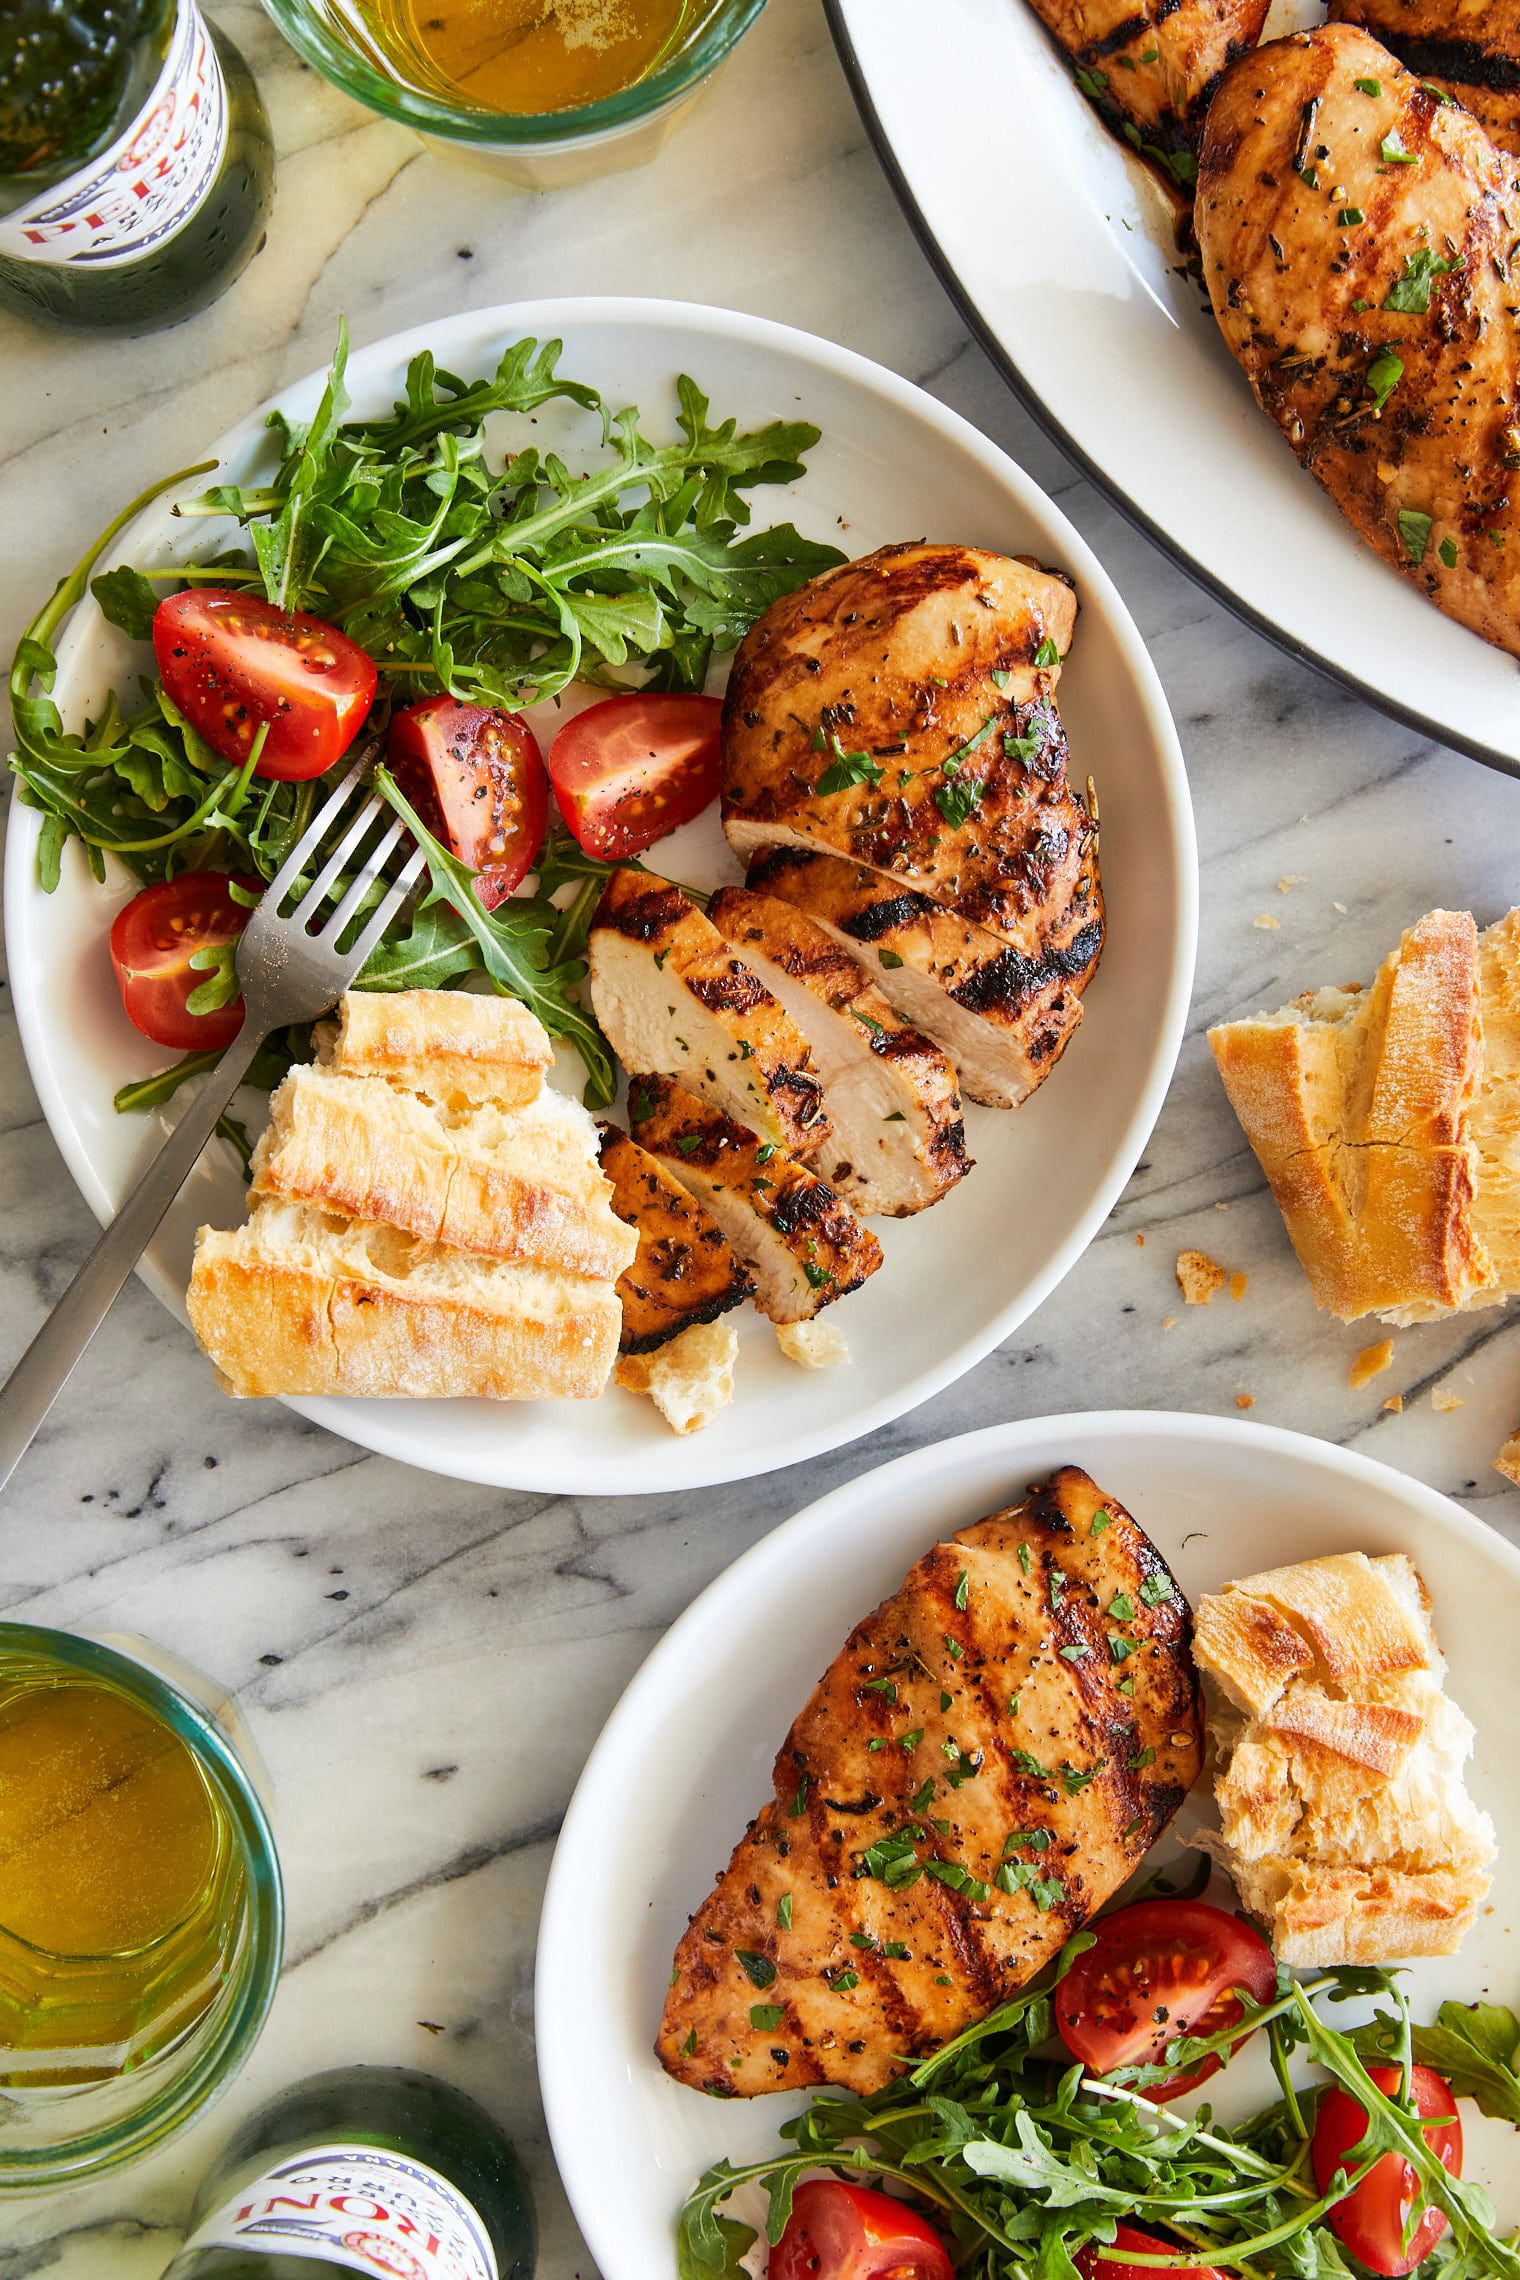 https://s23209.pcdn.co/wp-content/uploads/2015/06/Easy-Grilled-Chicken_068.jpg